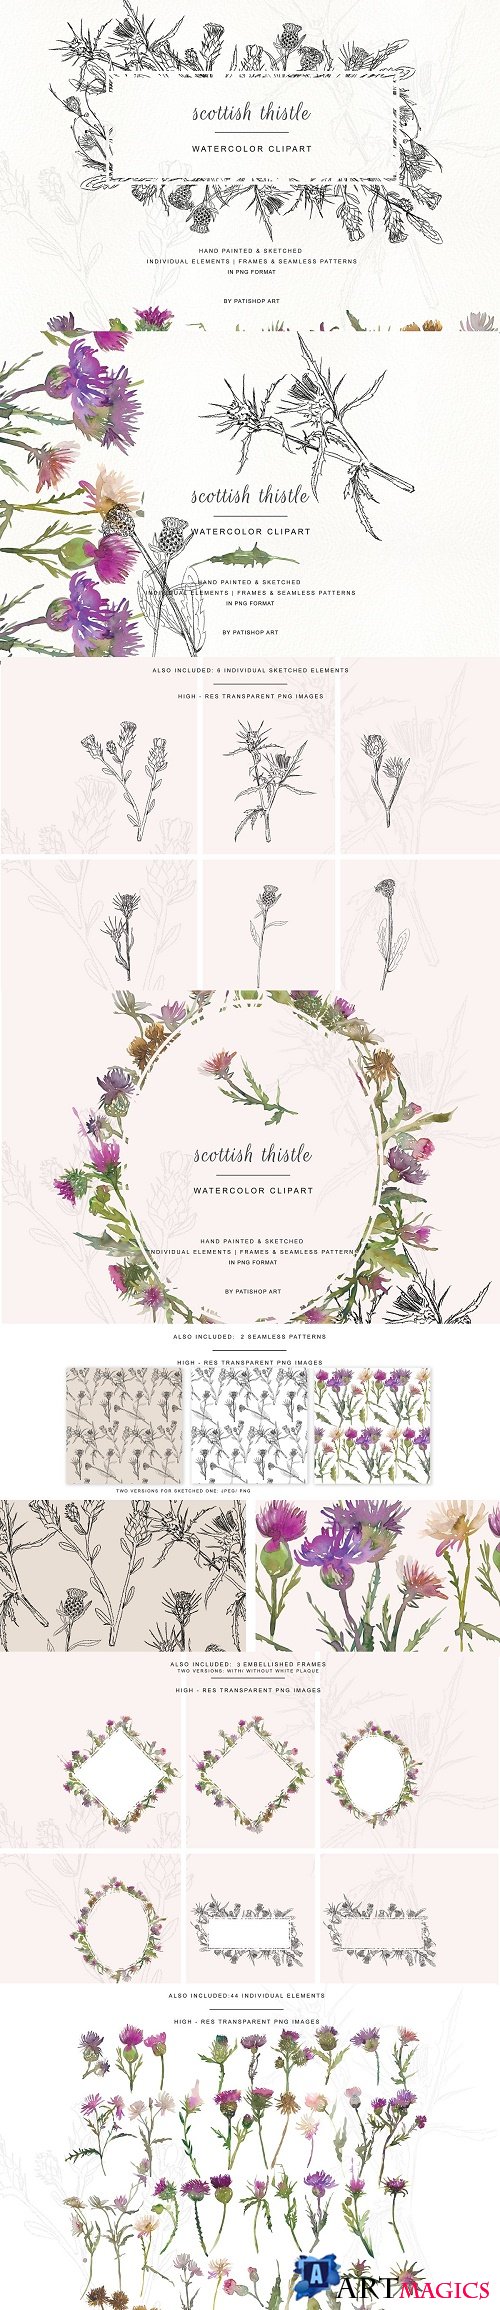 Hand Painted & Sketched Thistle - 3607253